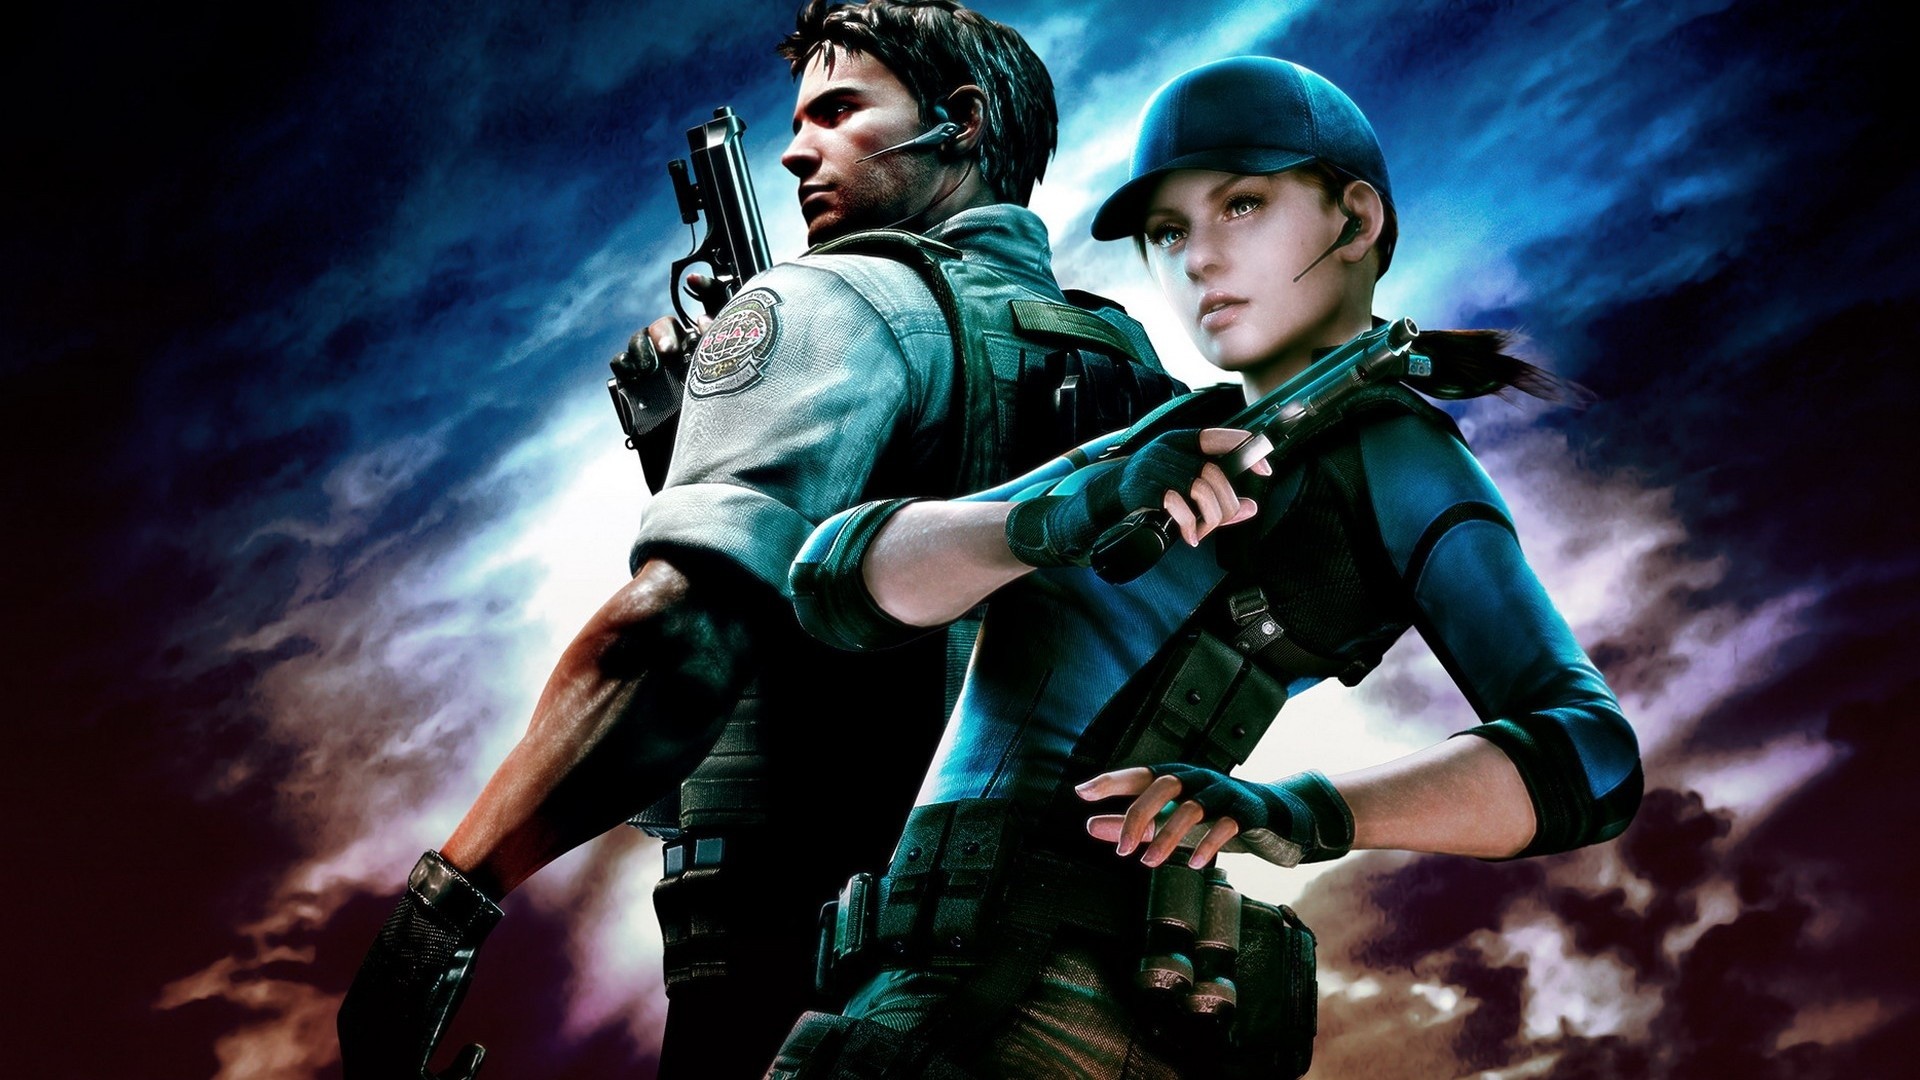 Resident Evil Chris and Jill My 2 favourite characters alongside with Four Eyes RE OPRC